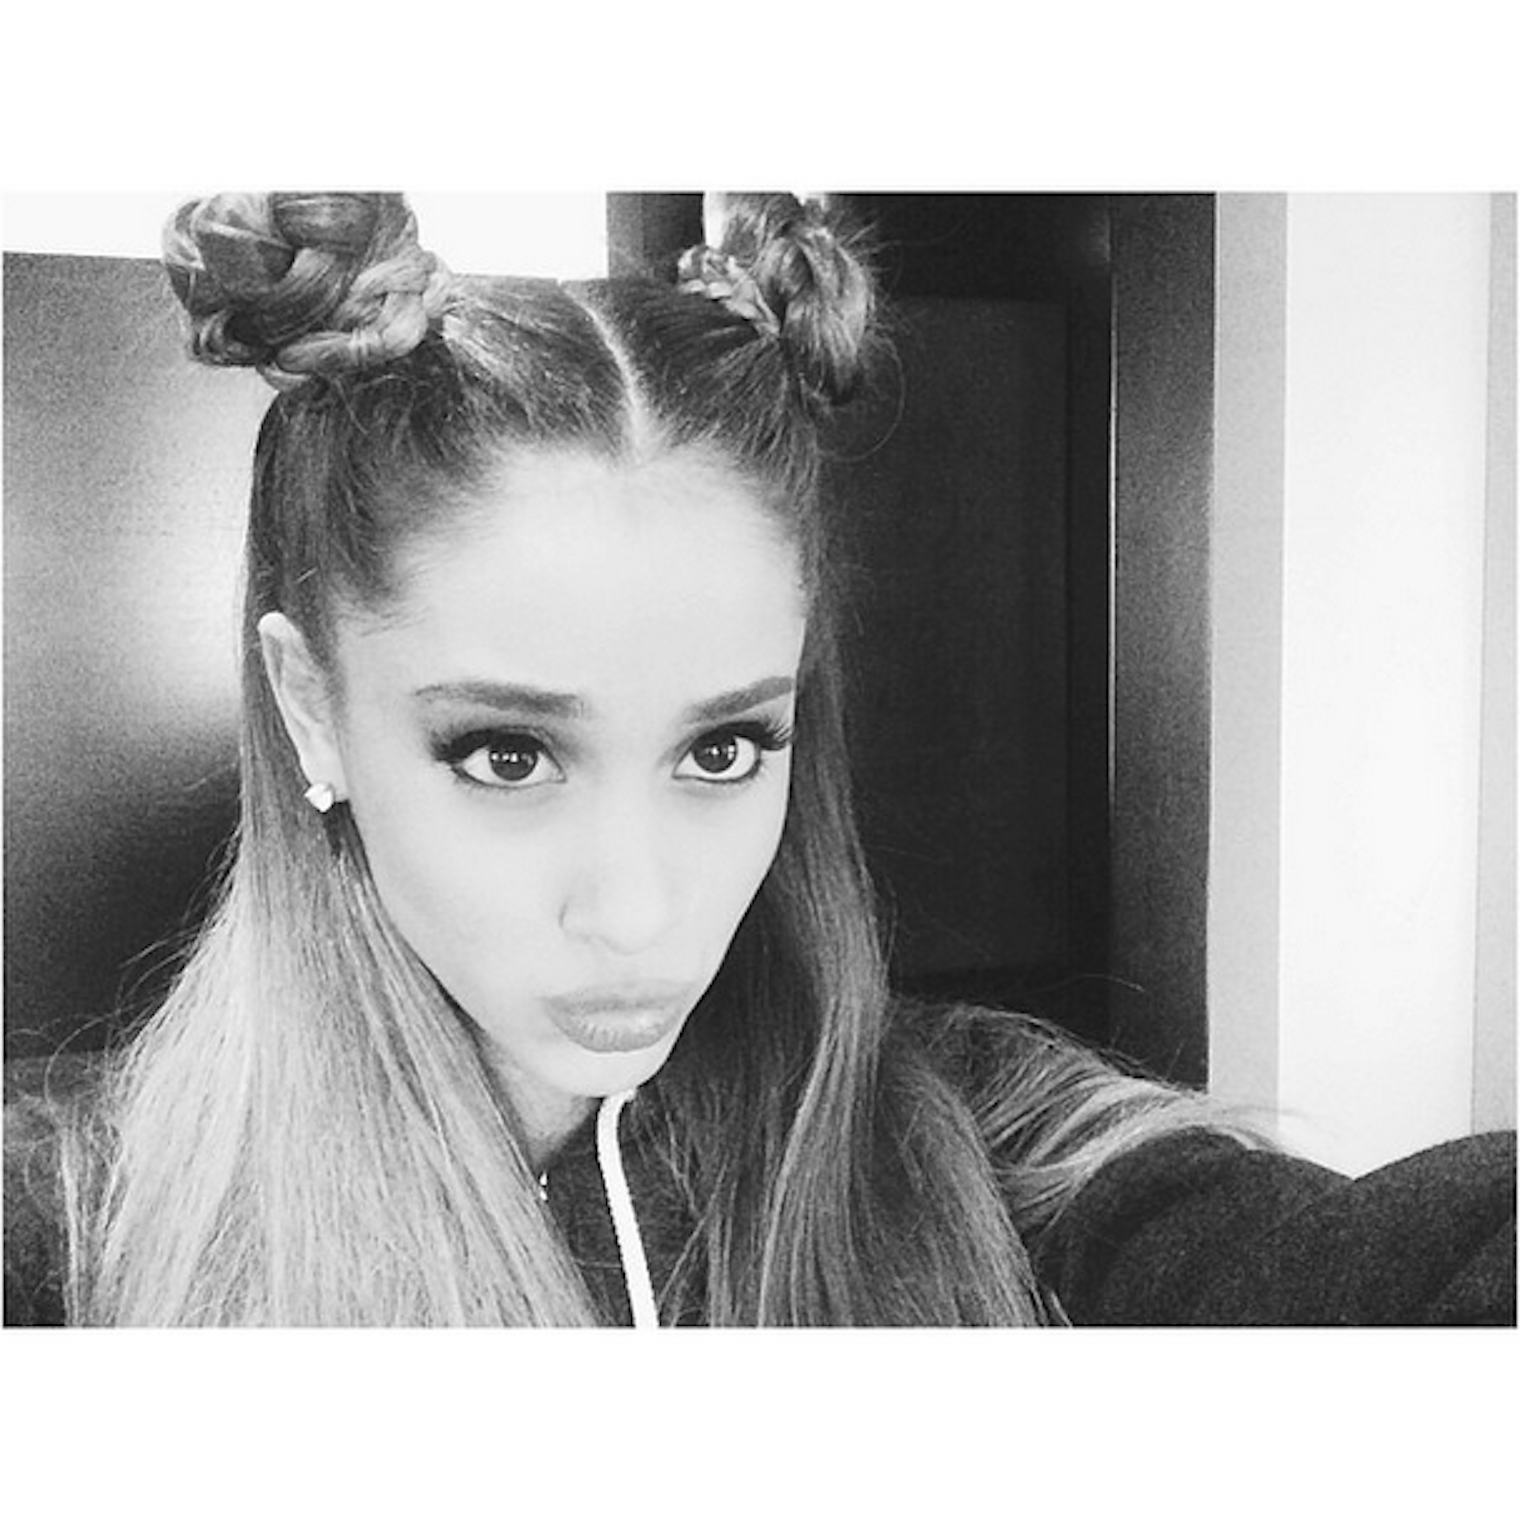 16 Other Ariana Grande Hair Styles Besides That One Half-Up Ponytail ...